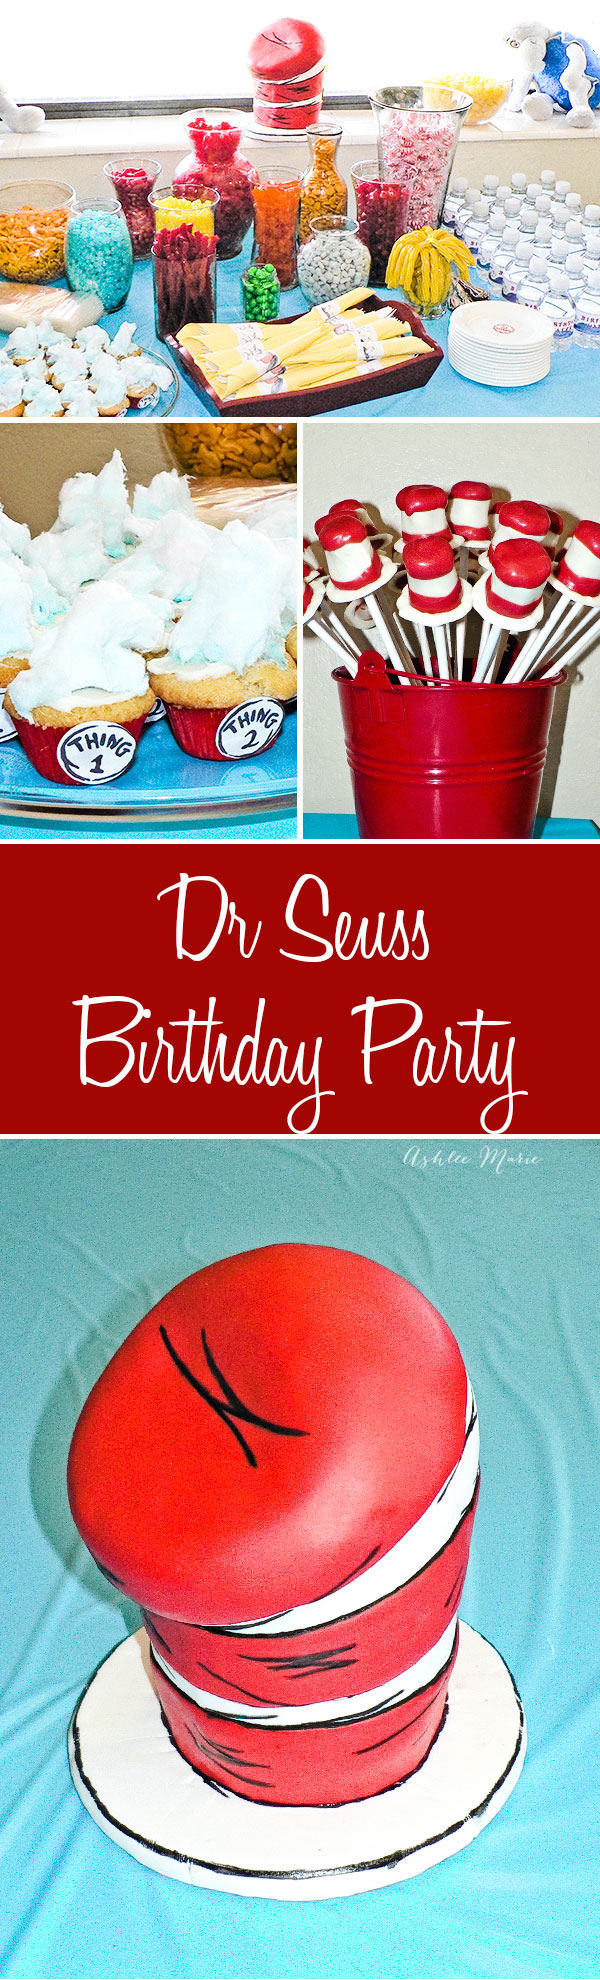 a fun dr seuss party, cake, food, invites, favors and more